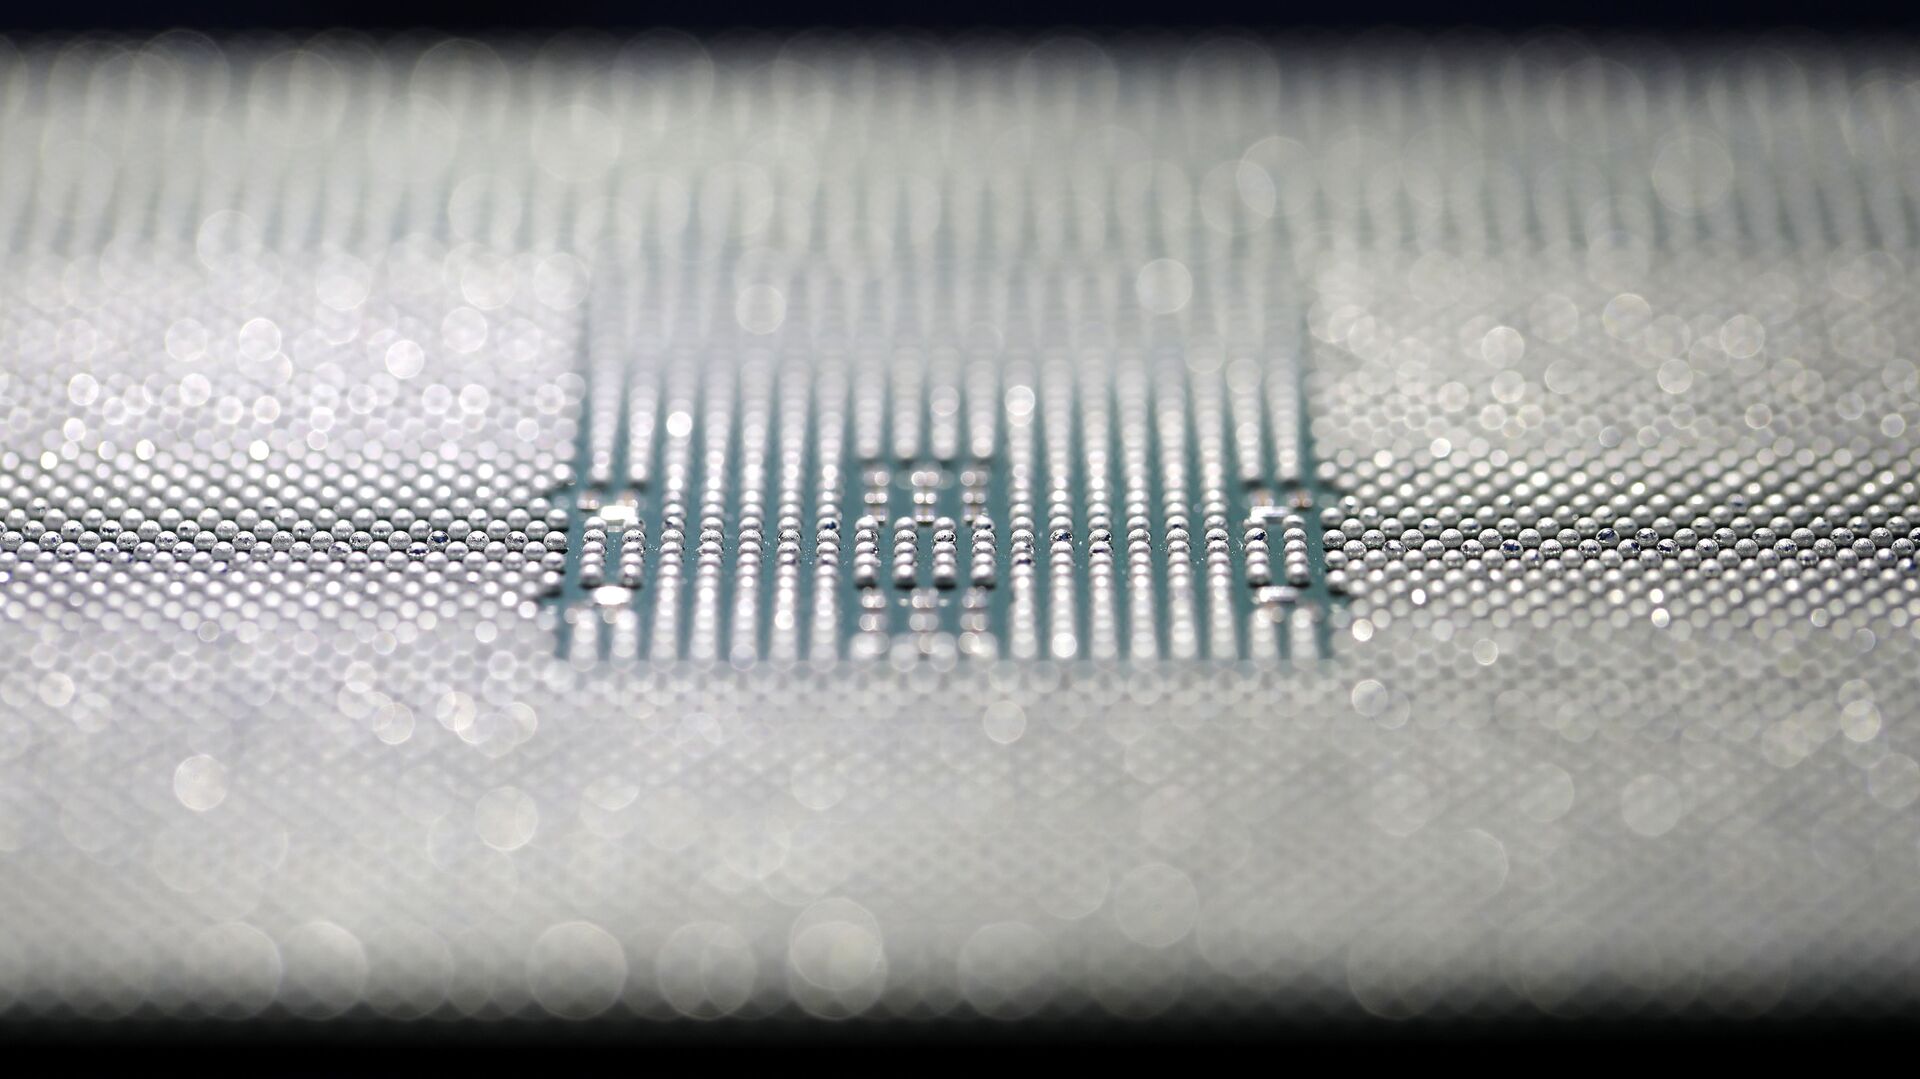 A Kunpeng 920 chip is displayed during an unveiling ceremony in Shenzhen, China, Monday, Jan. 7, 2019. Chinese telecom giant Huawei unveiled a processor chip for data centers and cloud computing as it expands into an emerging global market despite Western warnings the company might be a security risk.  - Sputnik International, 1920, 04.02.2021